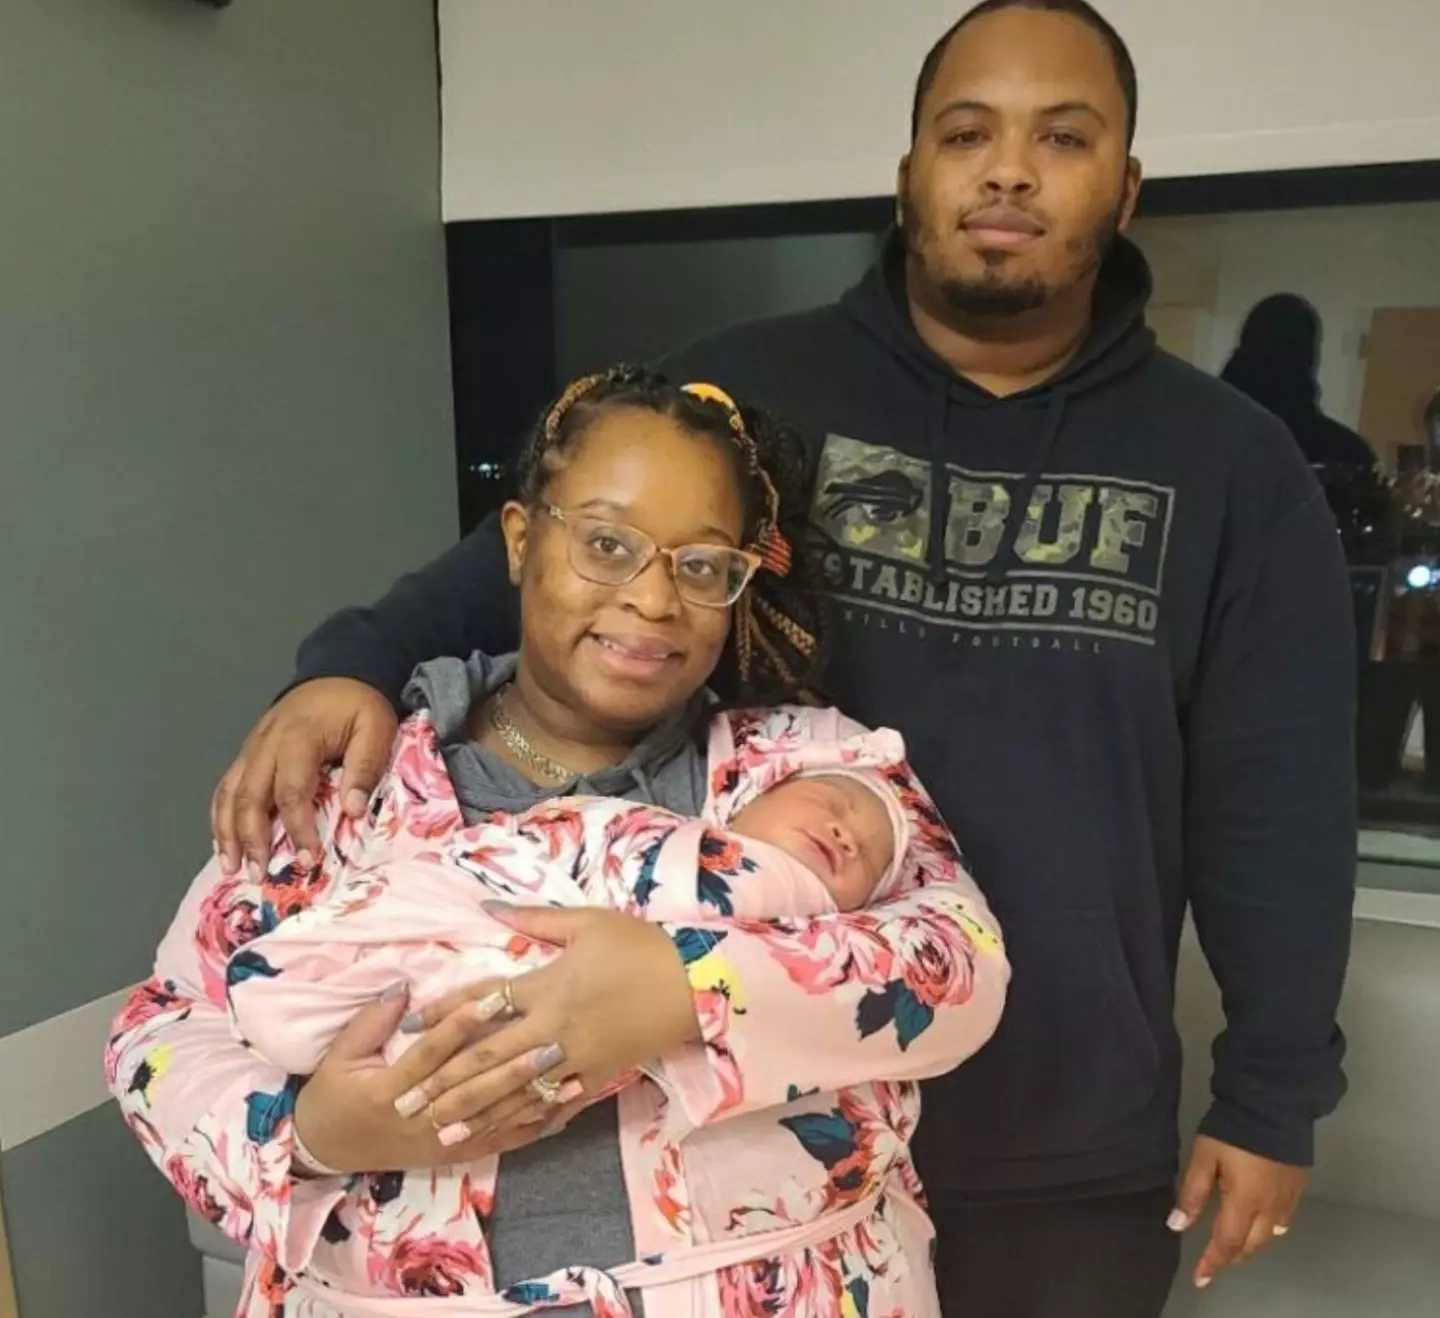 A pregnant woman had to deliver her baby at home during a snow blizzard.